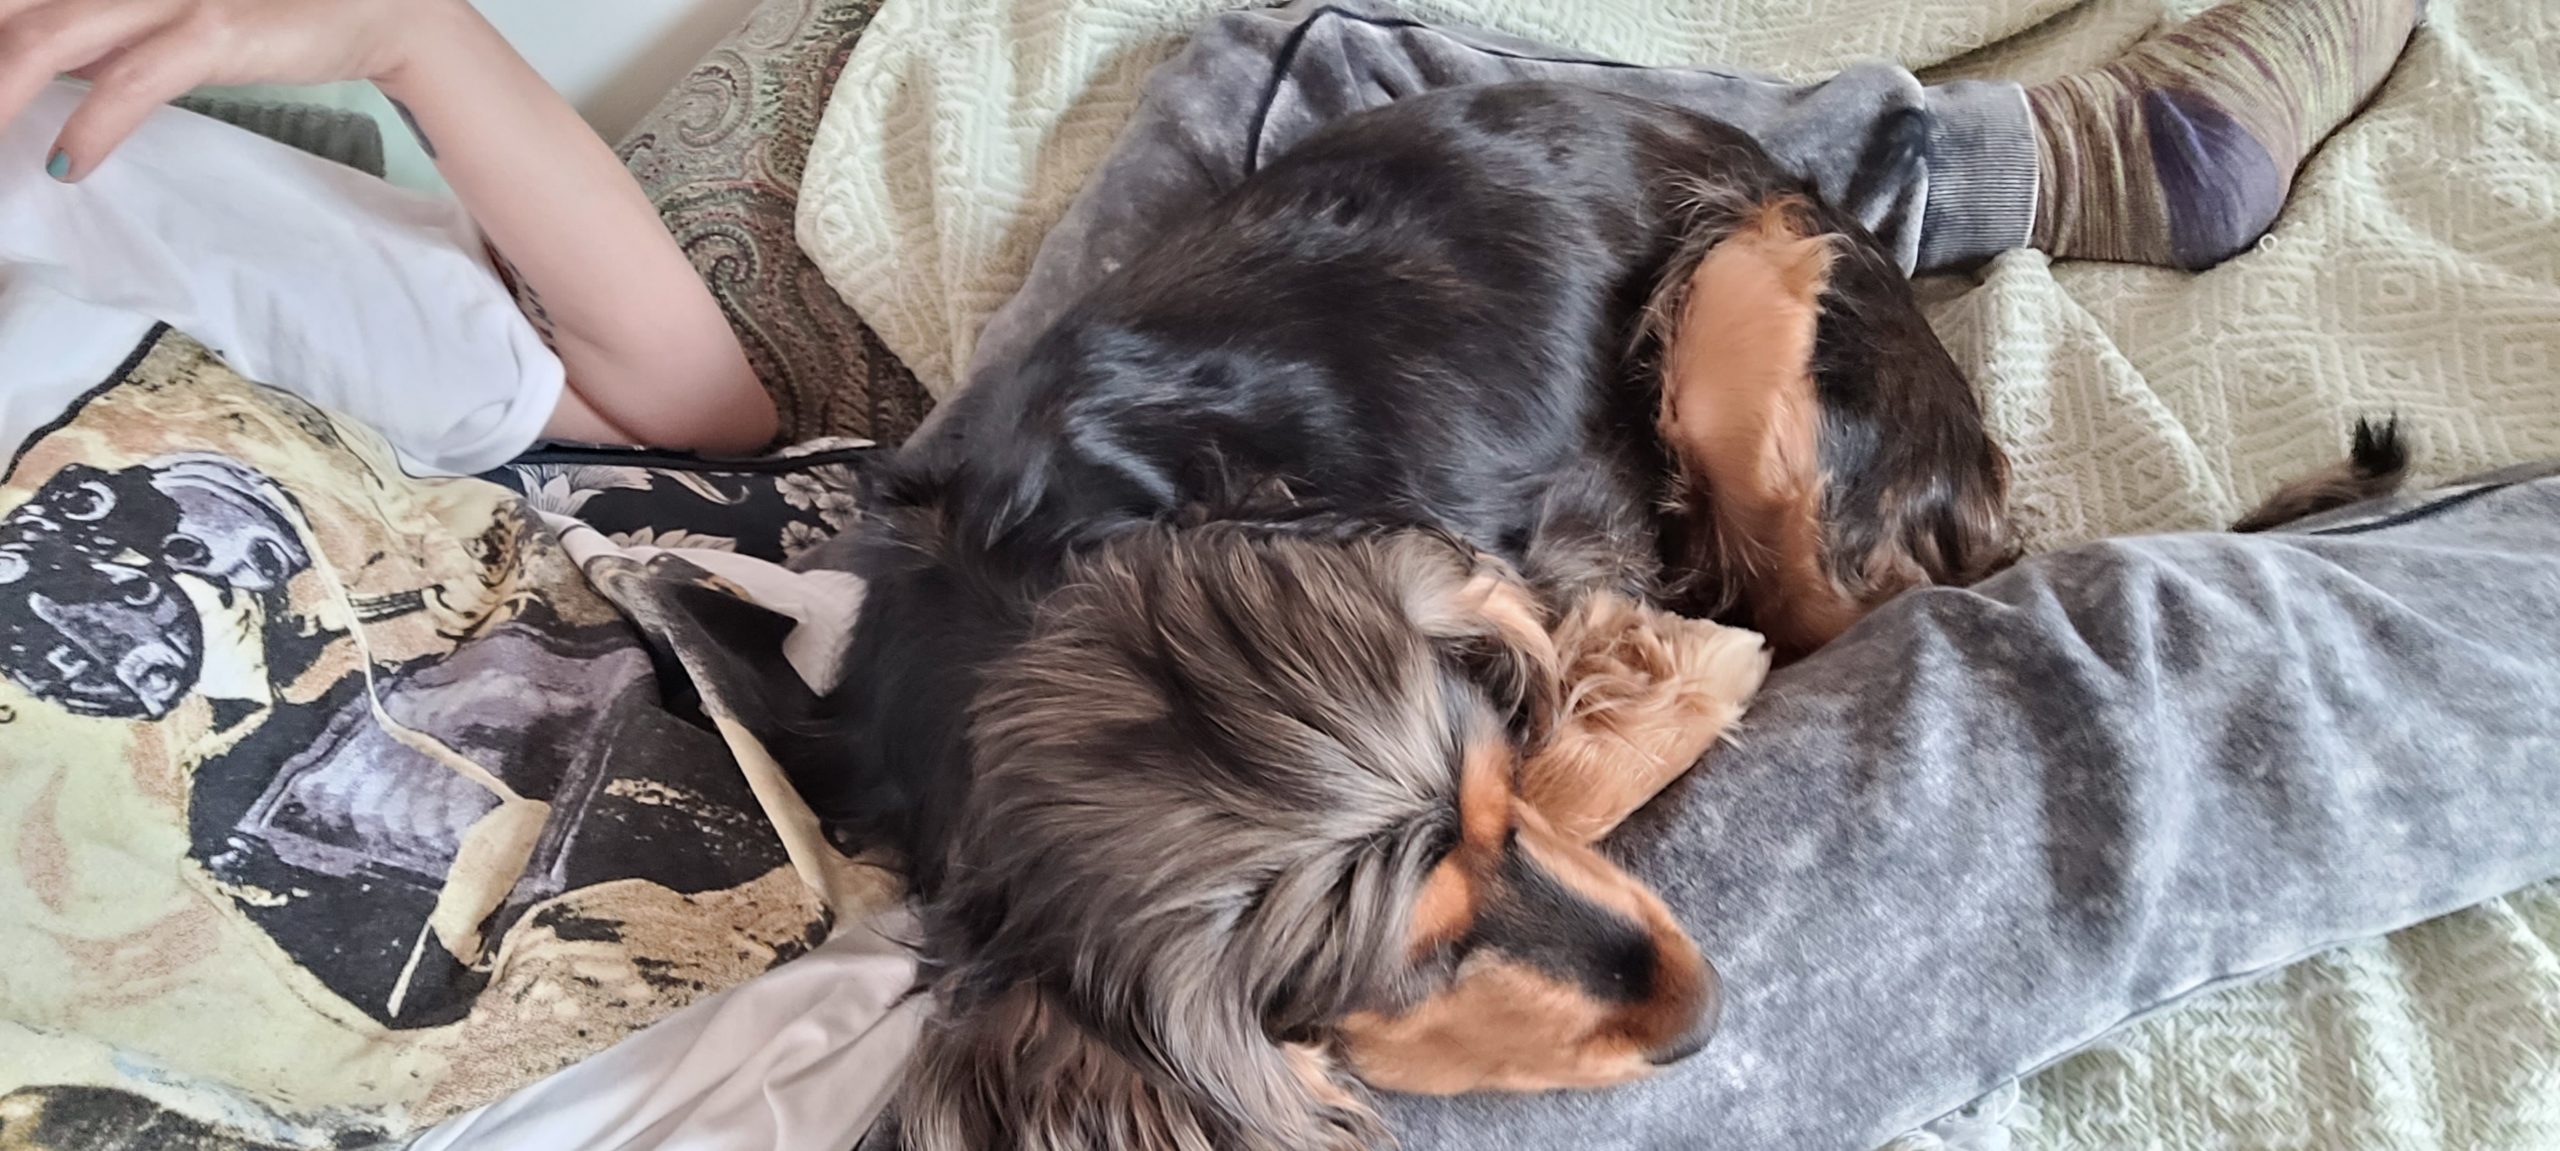 a cocker spaniel laying on a person